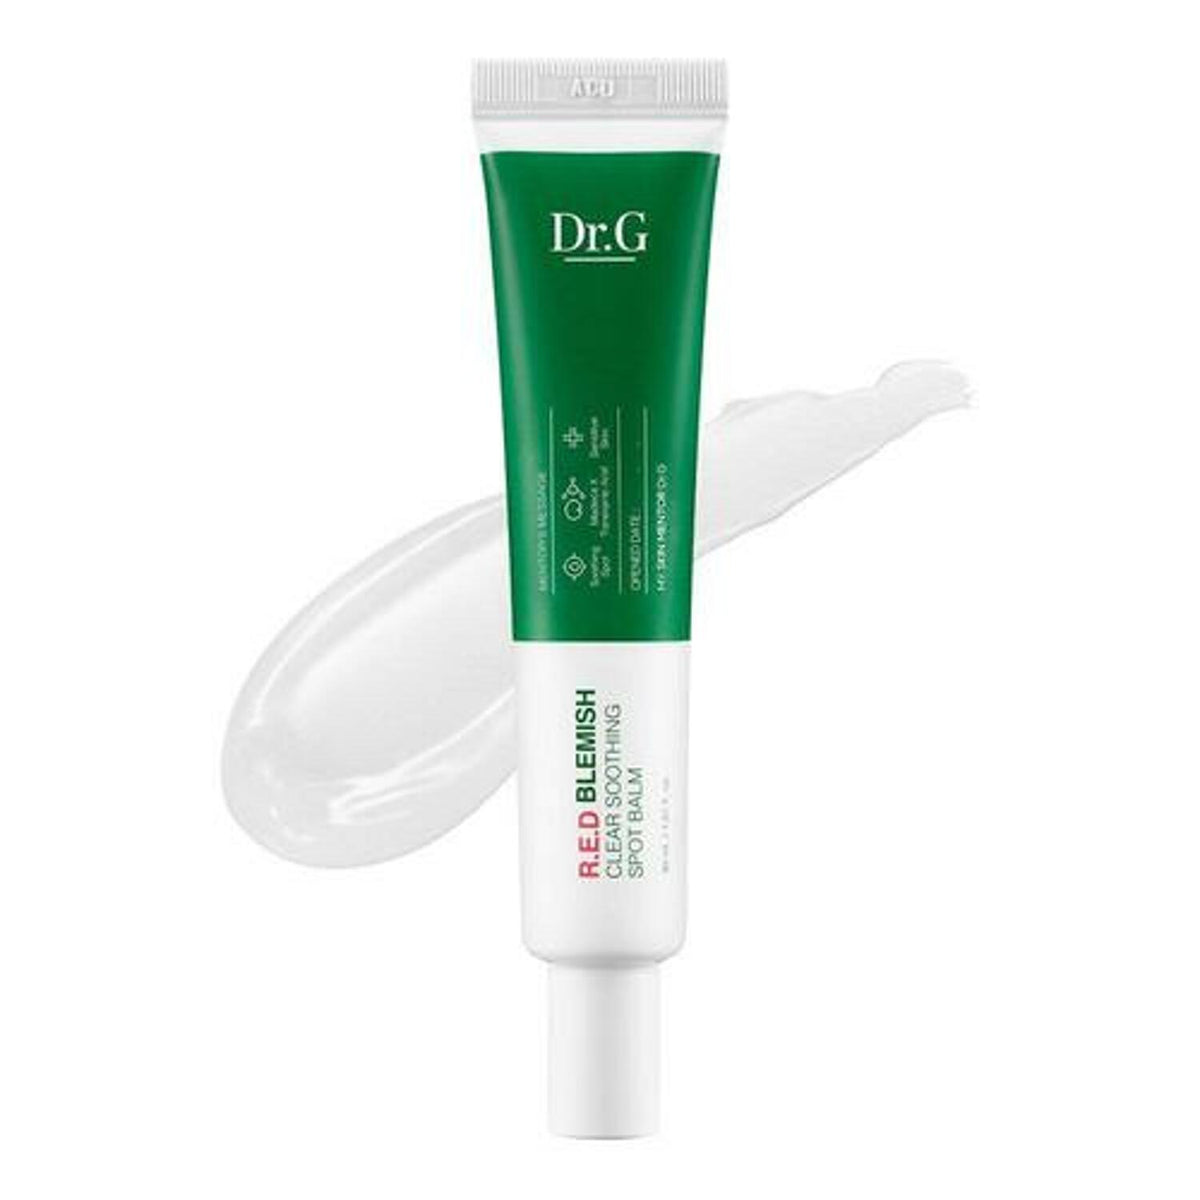 Dr.G Red Blemish Clear Soothing Spot Balm